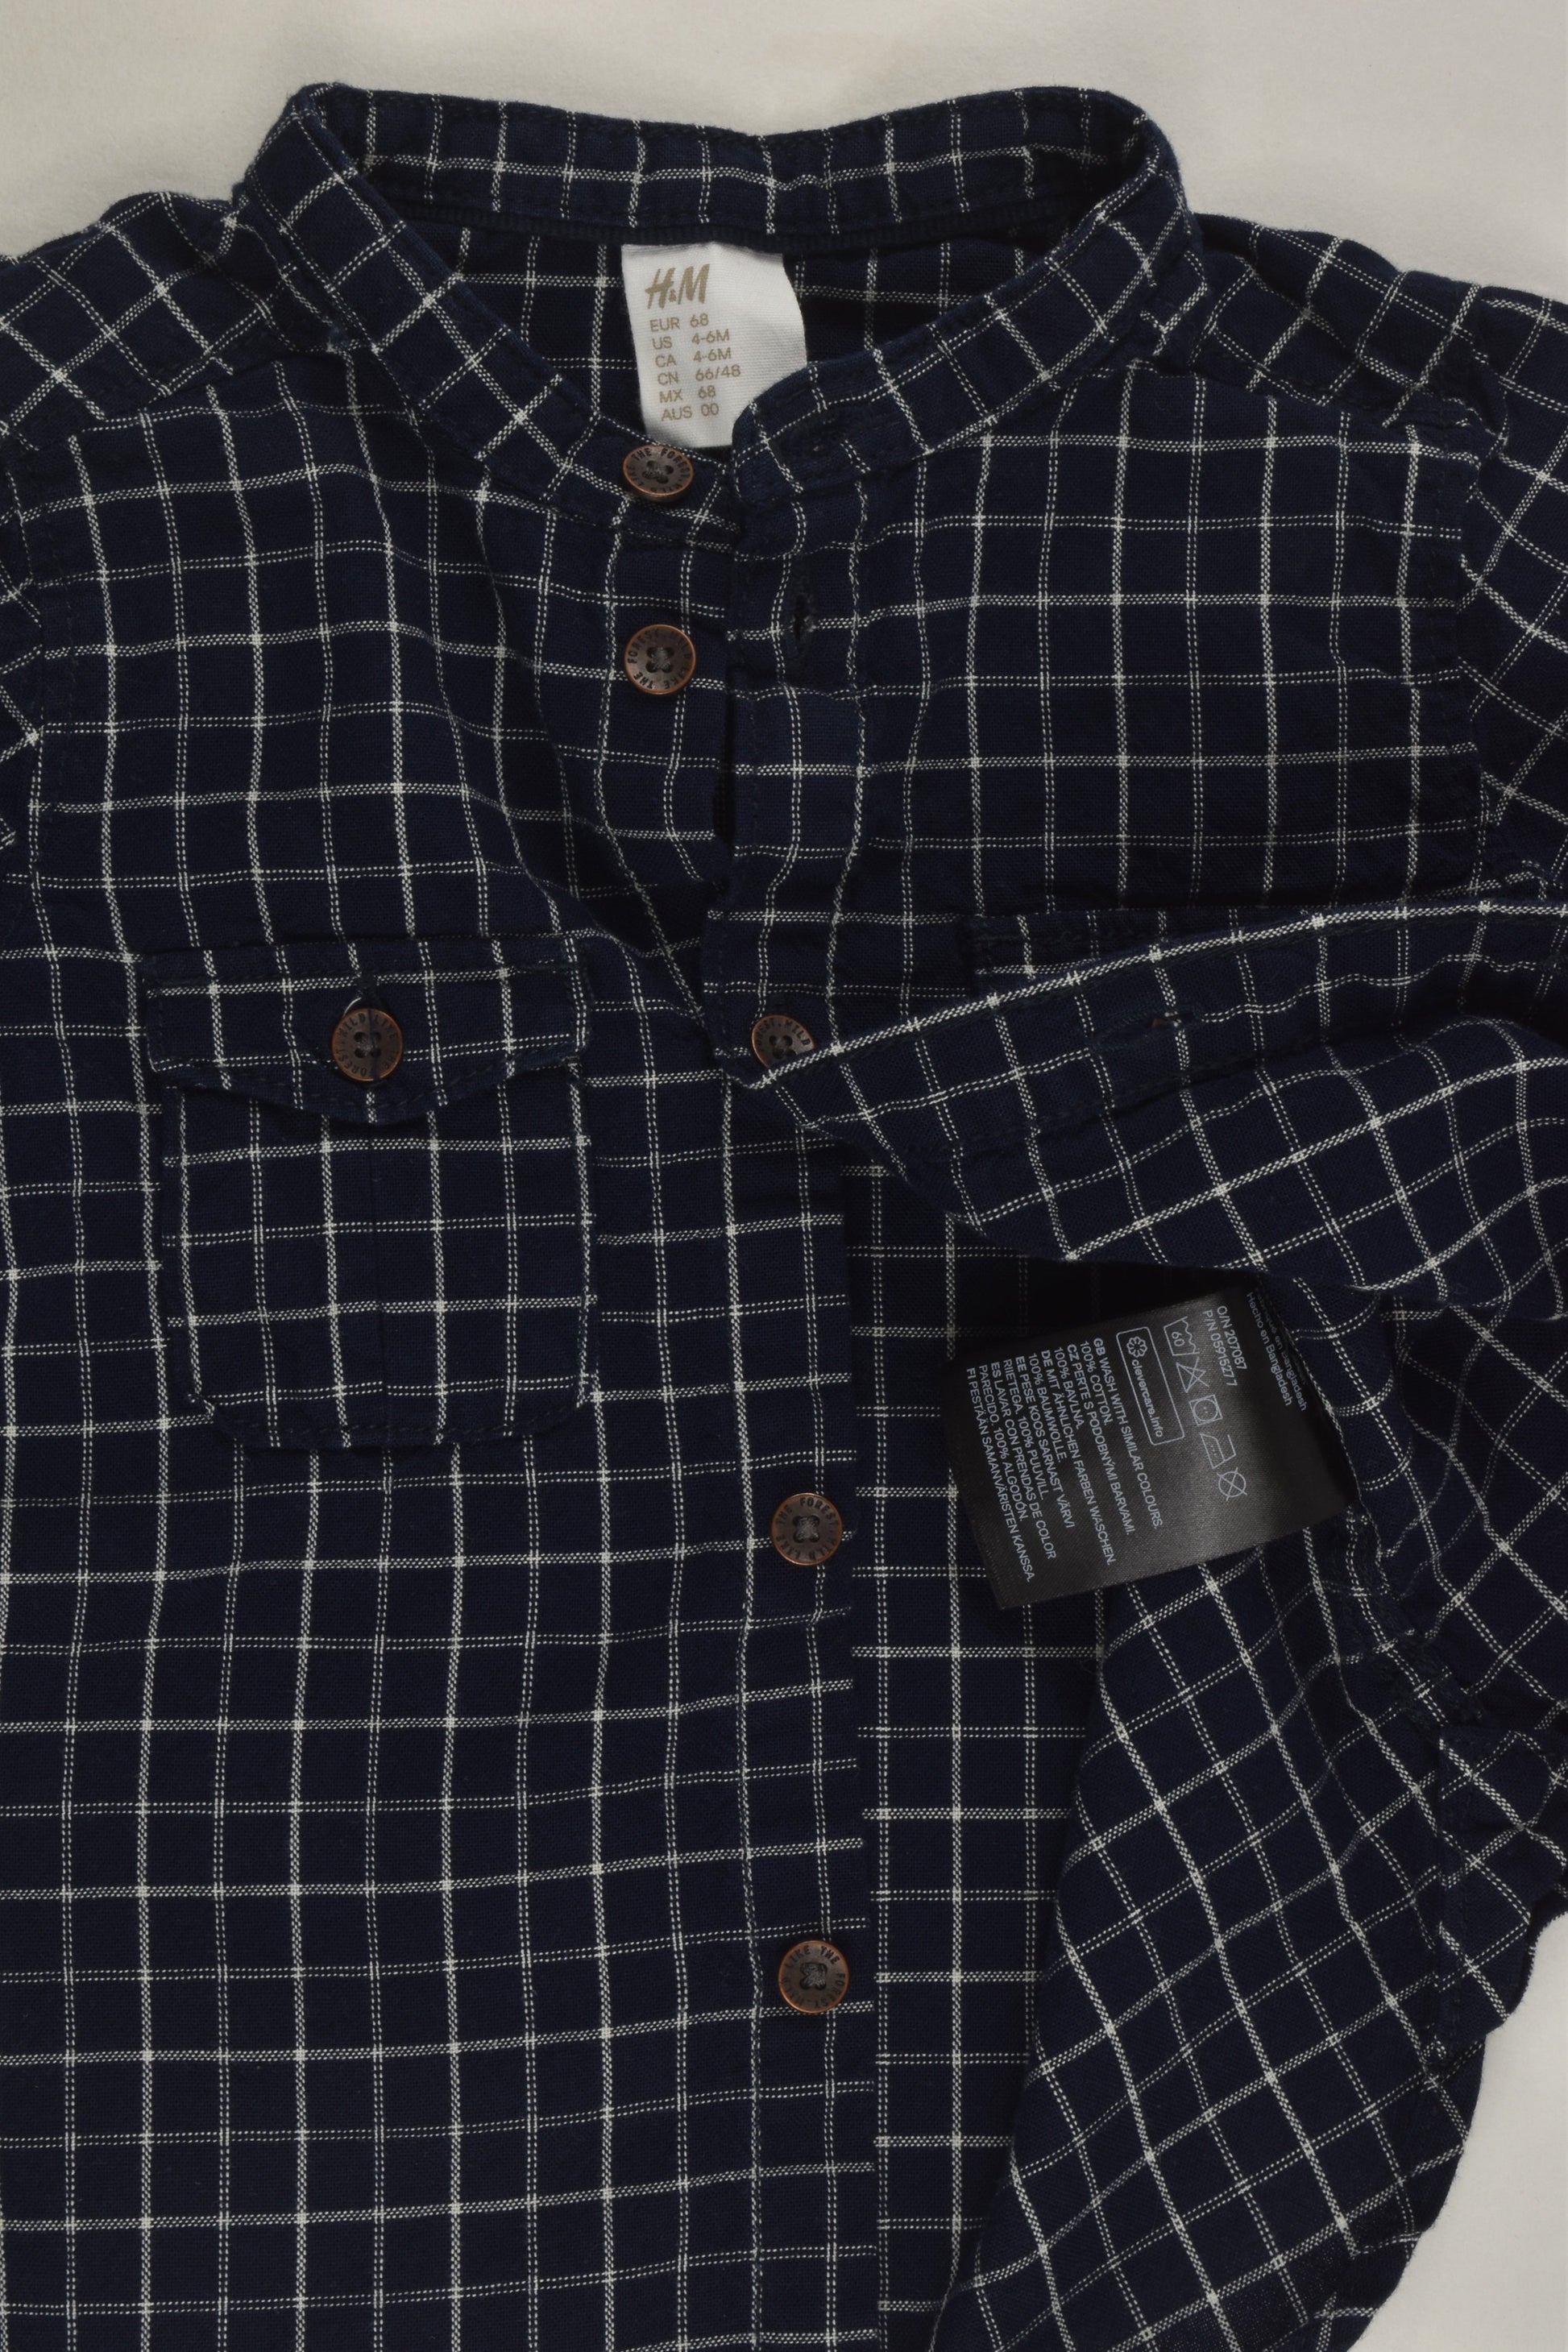 H&M Size 00 Checked Shirt